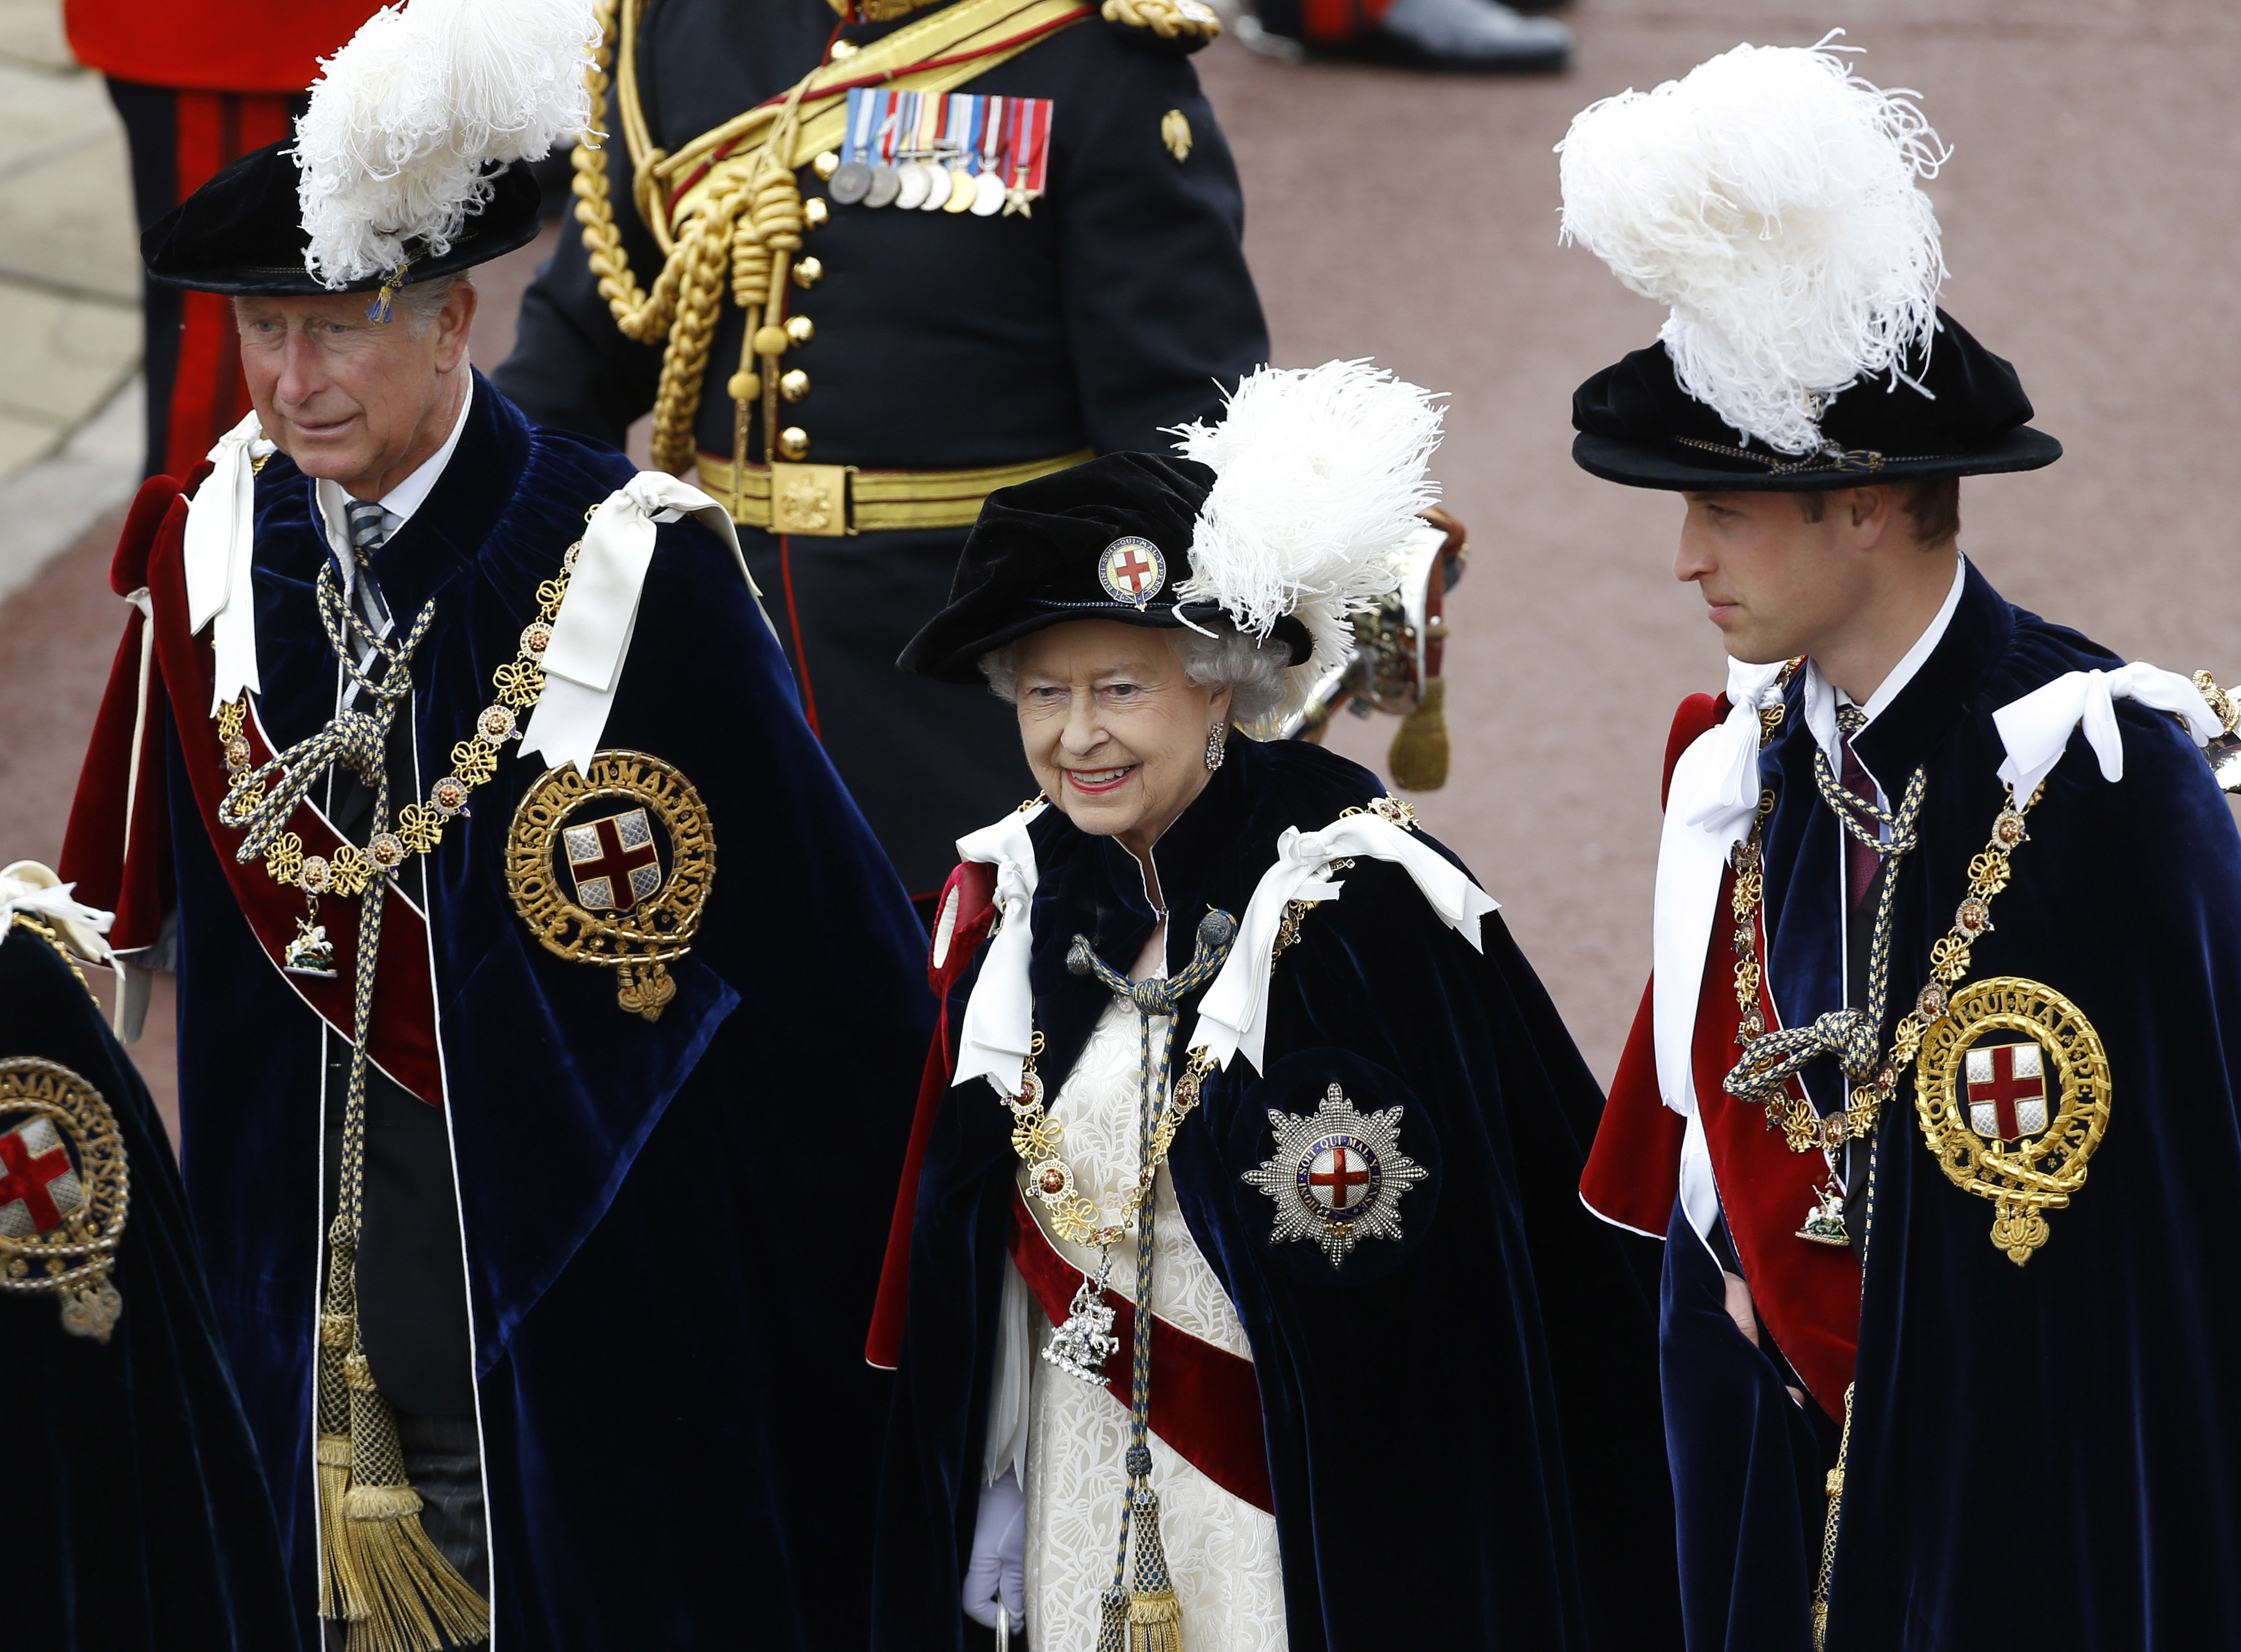 Prince Charles, Queen Elizabeth II, and Prince William